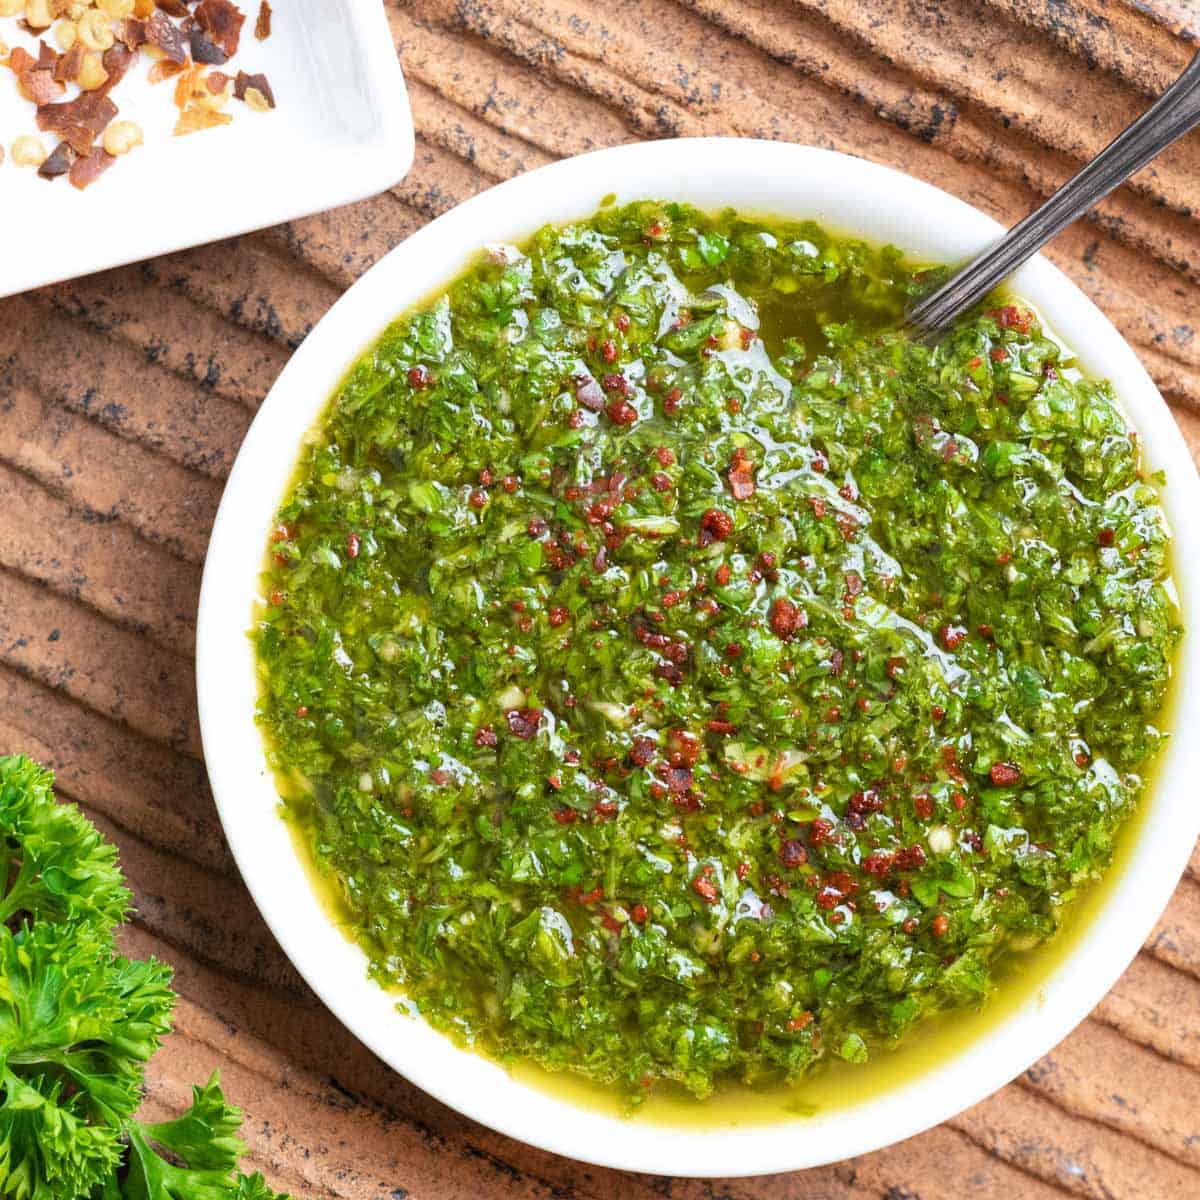 https://radfoodie.com/wp-content/uploads/2023/05/Mexican-chimichurri-square-2.jpg